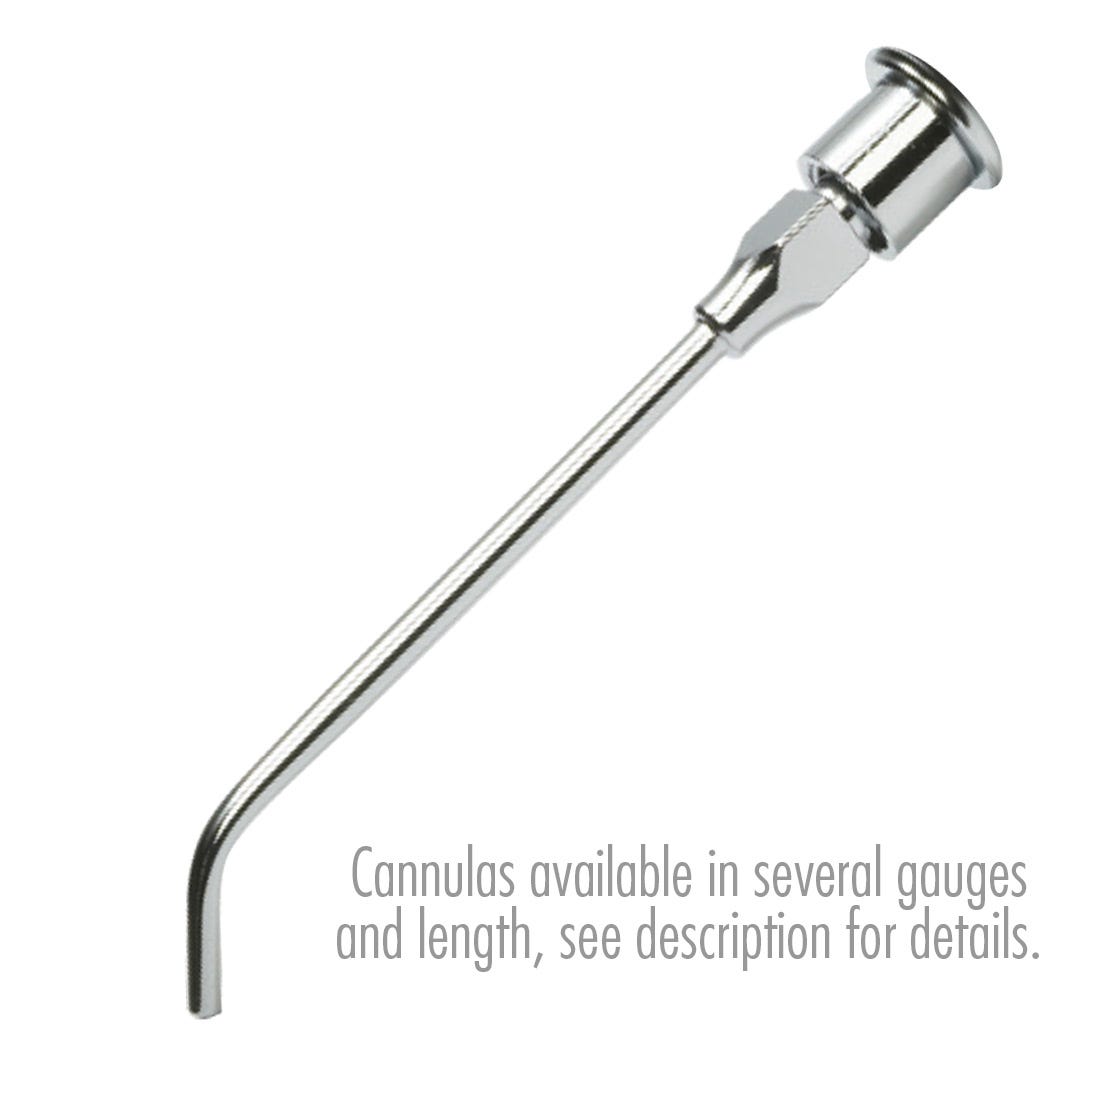 ACE Irrigation Cannula - Stainless Steel 14G x 2", 45 degree angle